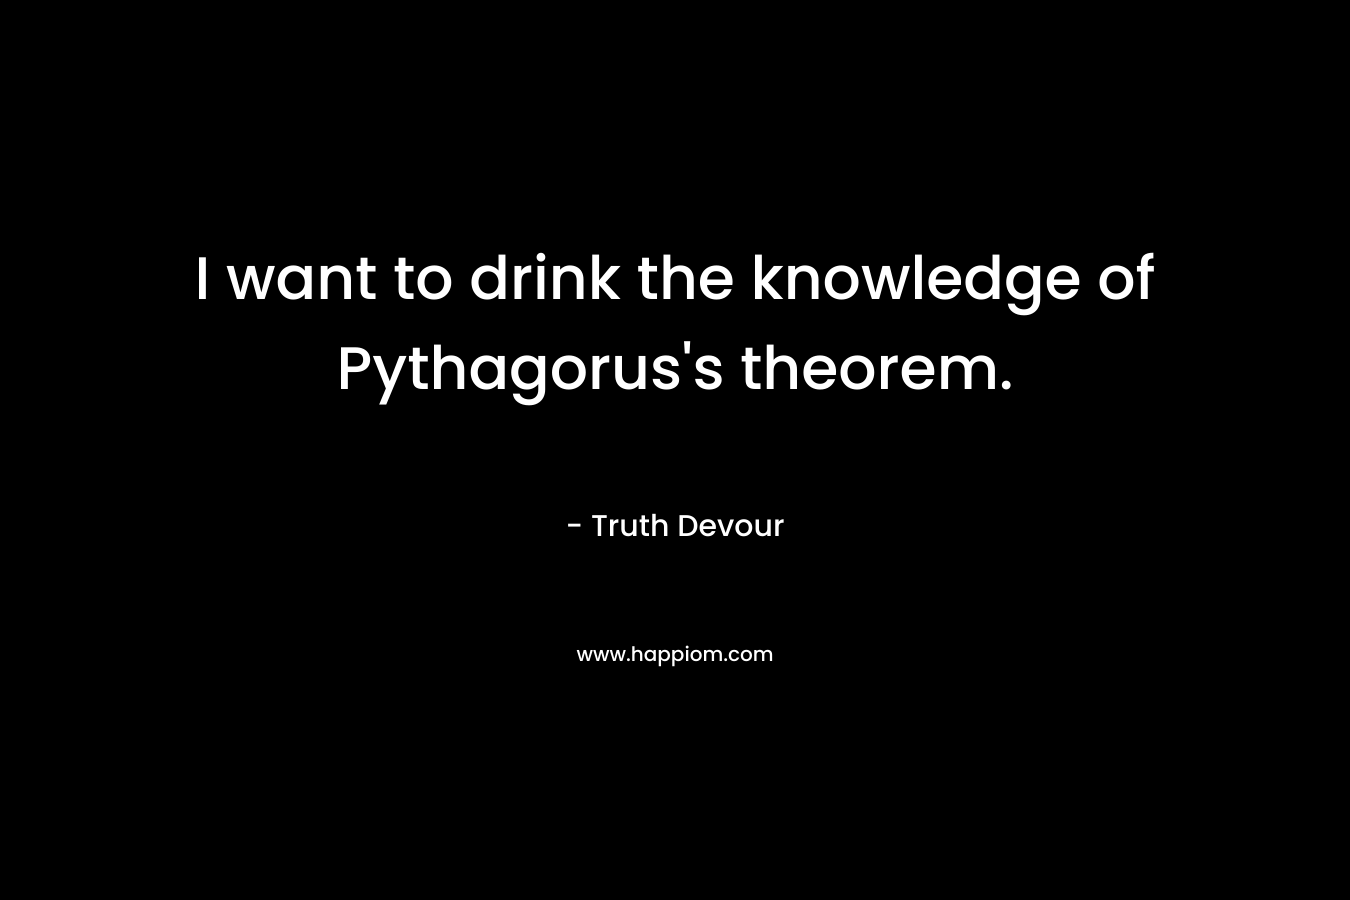 I want to drink the knowledge of Pythagorus’s theorem. – Truth Devour